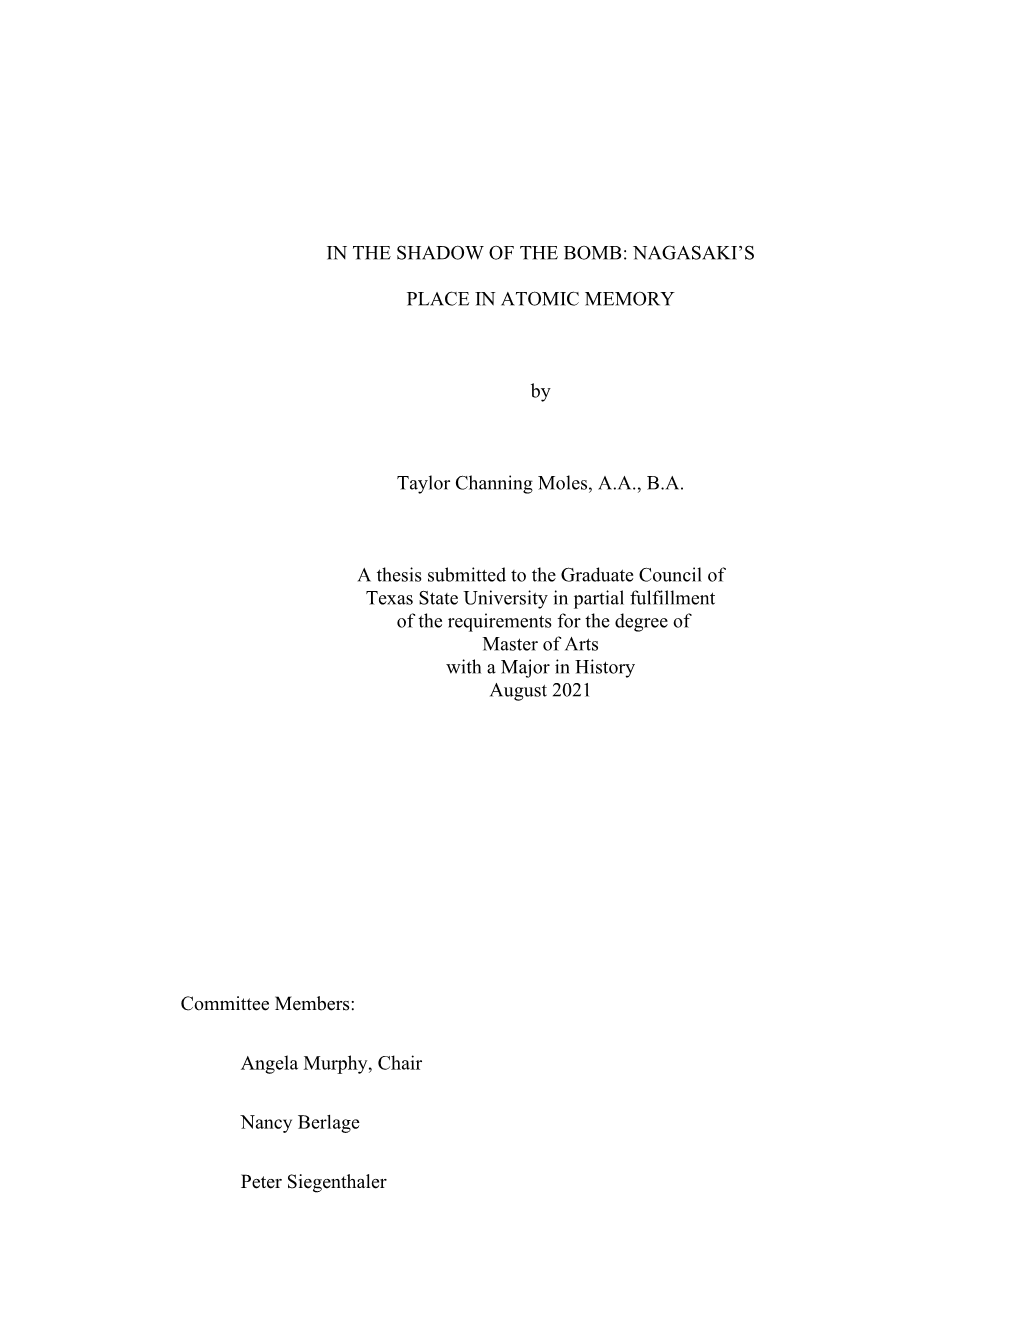 IN the SHADOW of the BOMB: NAGASAKI's PLACE in ATOMIC MEMORY by Taylor Channing Moles, A.A., B.A. a Thesis Submitted to the G